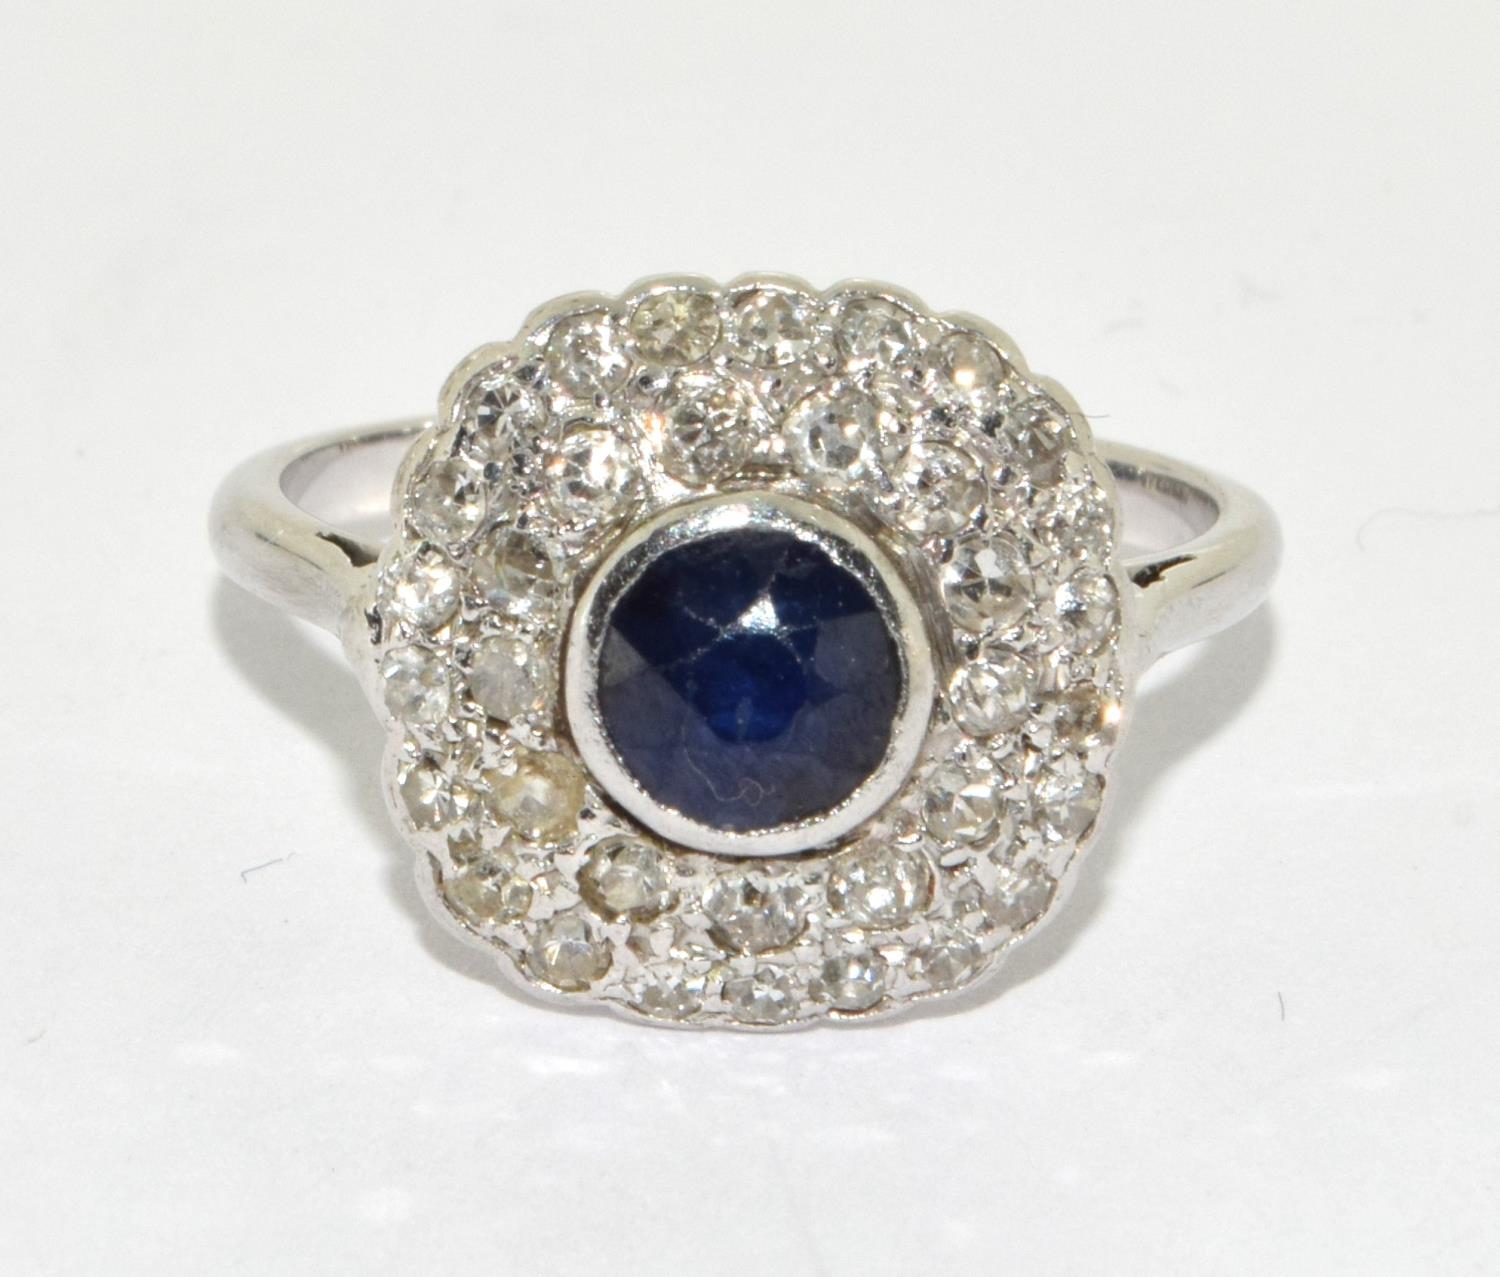 18ct white gold ladies Diamond and Sapphire square face cocktail ring size M - Image 5 of 5